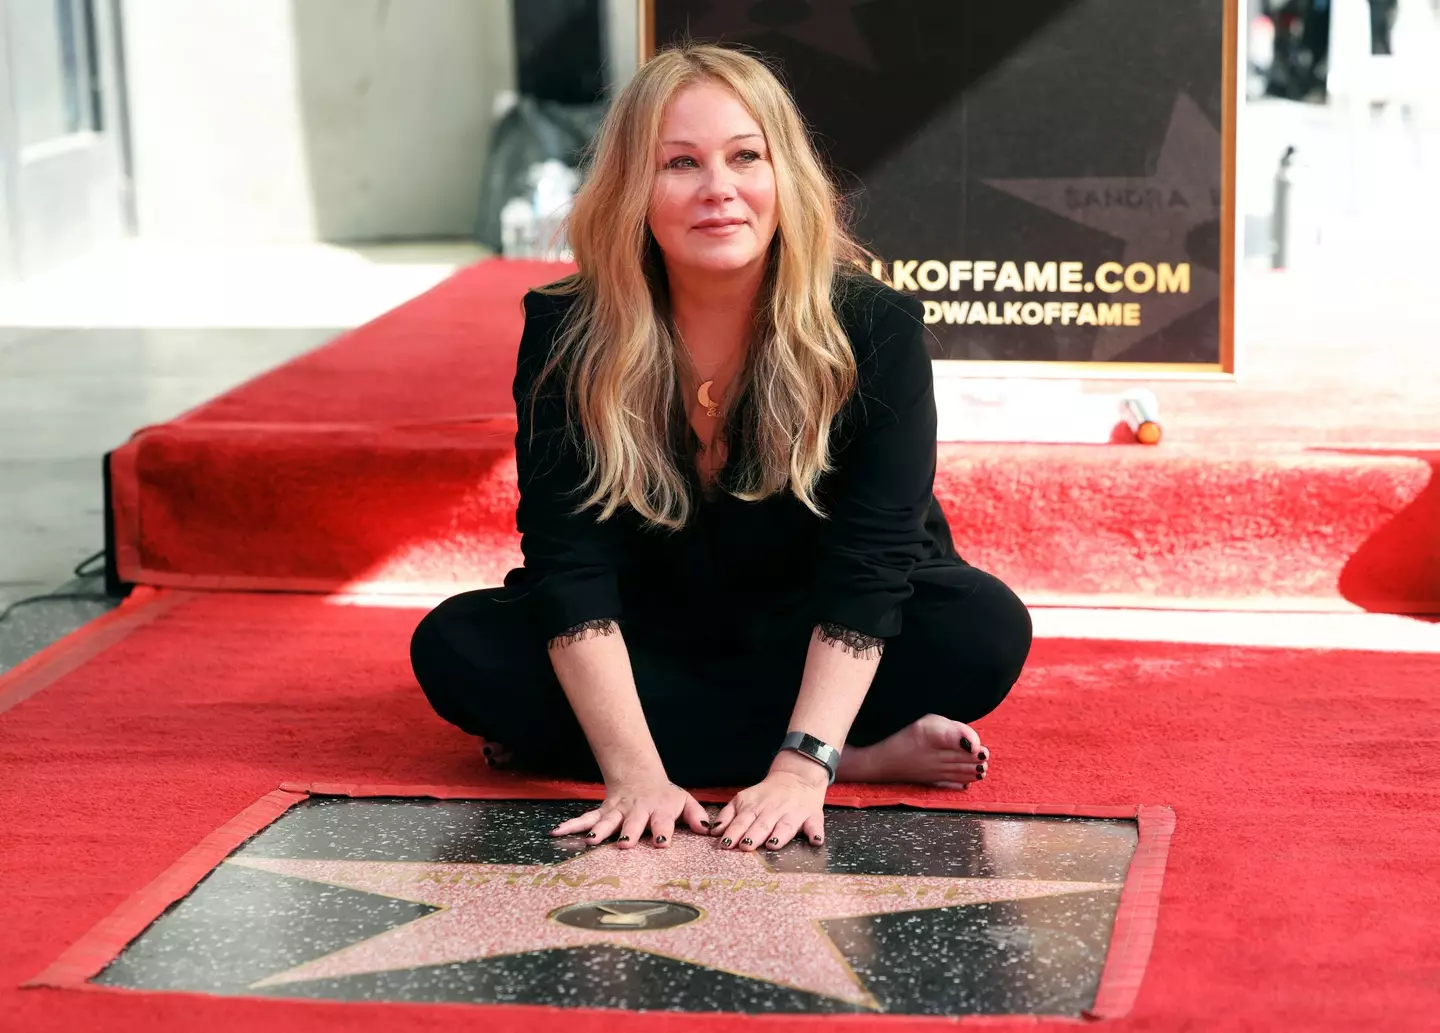 Christina Applegate revealed in August 2021 she was diagnosed with MS.